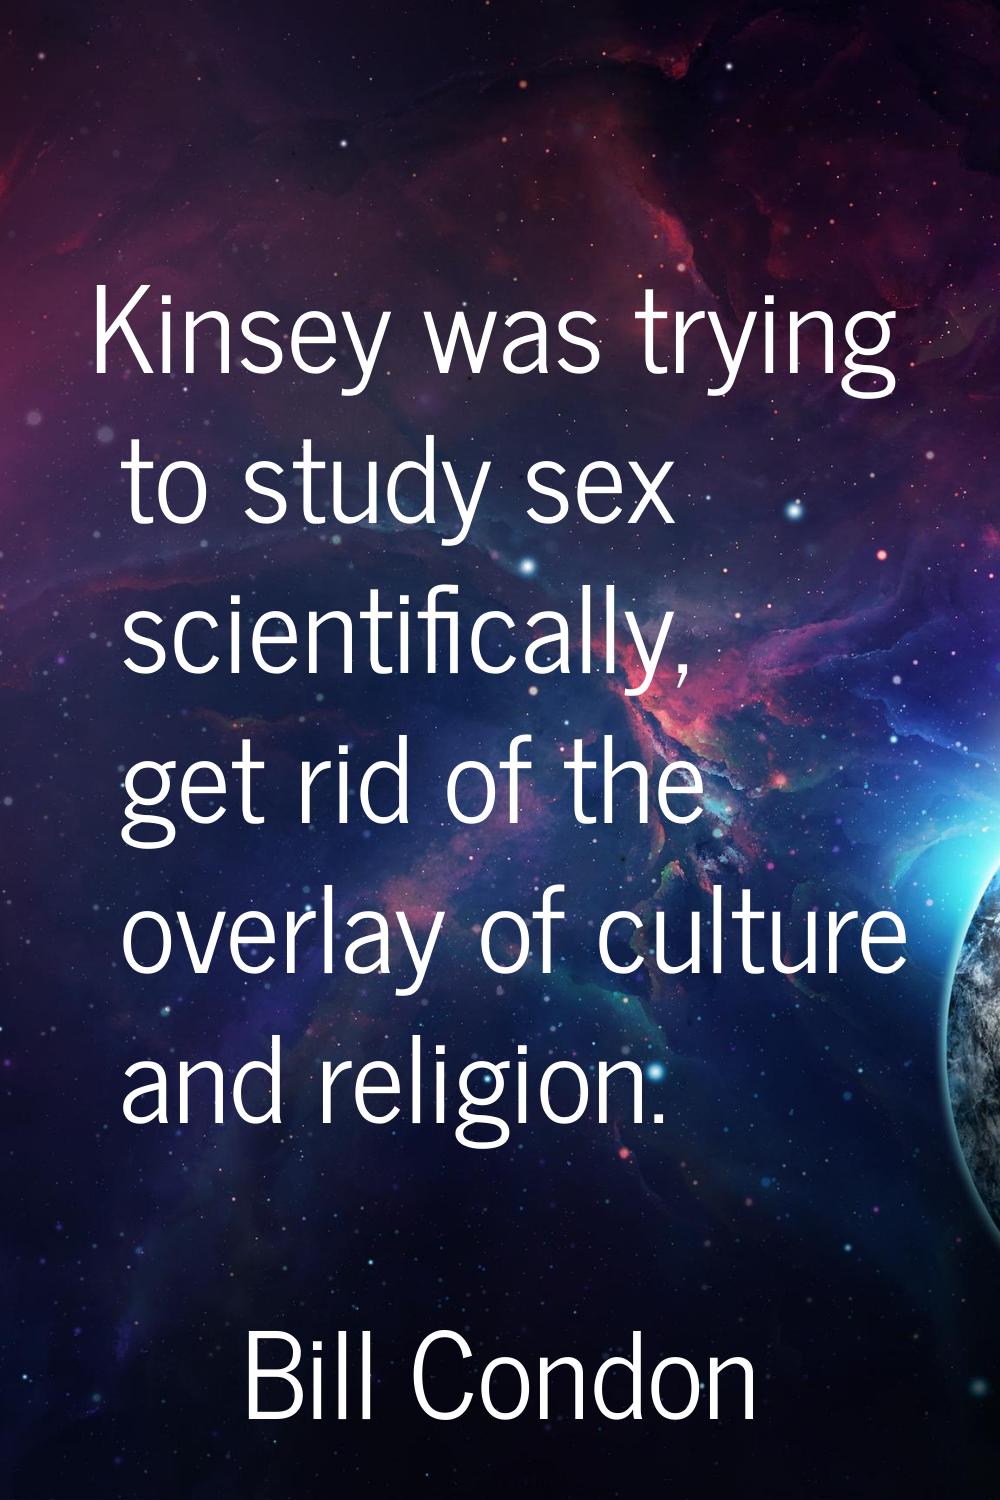 Kinsey was trying to study sex scientifically, get rid of the overlay of culture and religion.